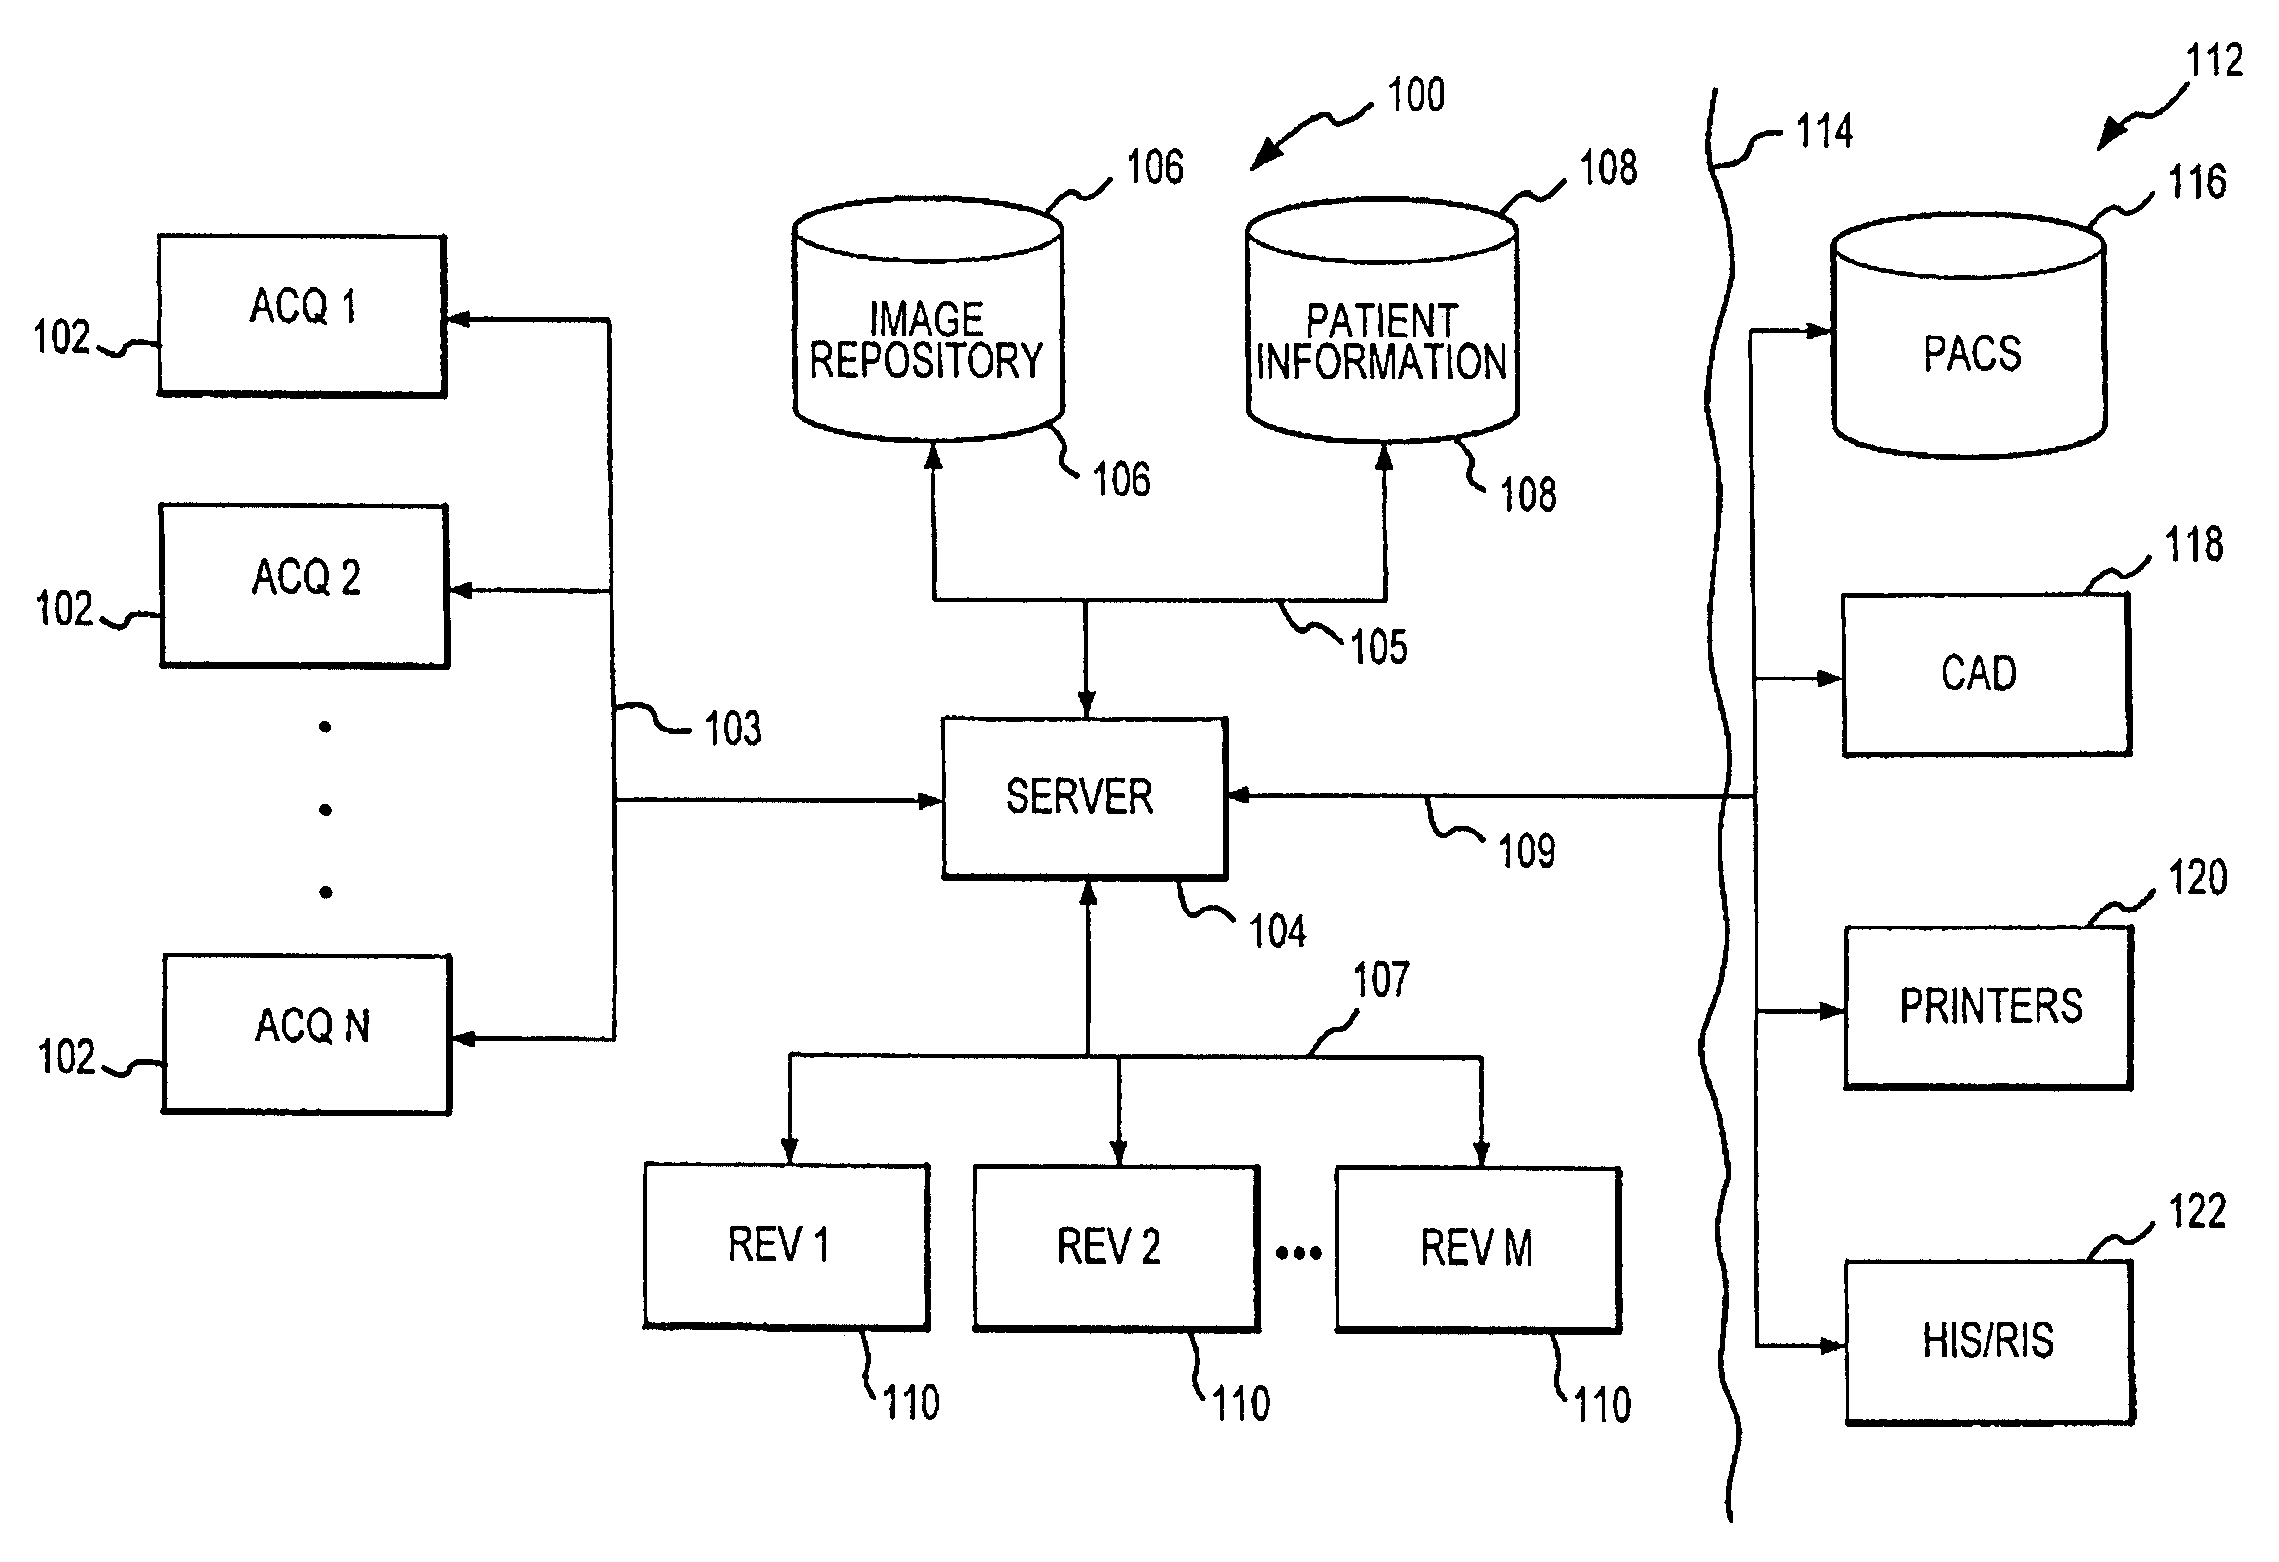 Distributed architecture for mammographic image acquisition and processing